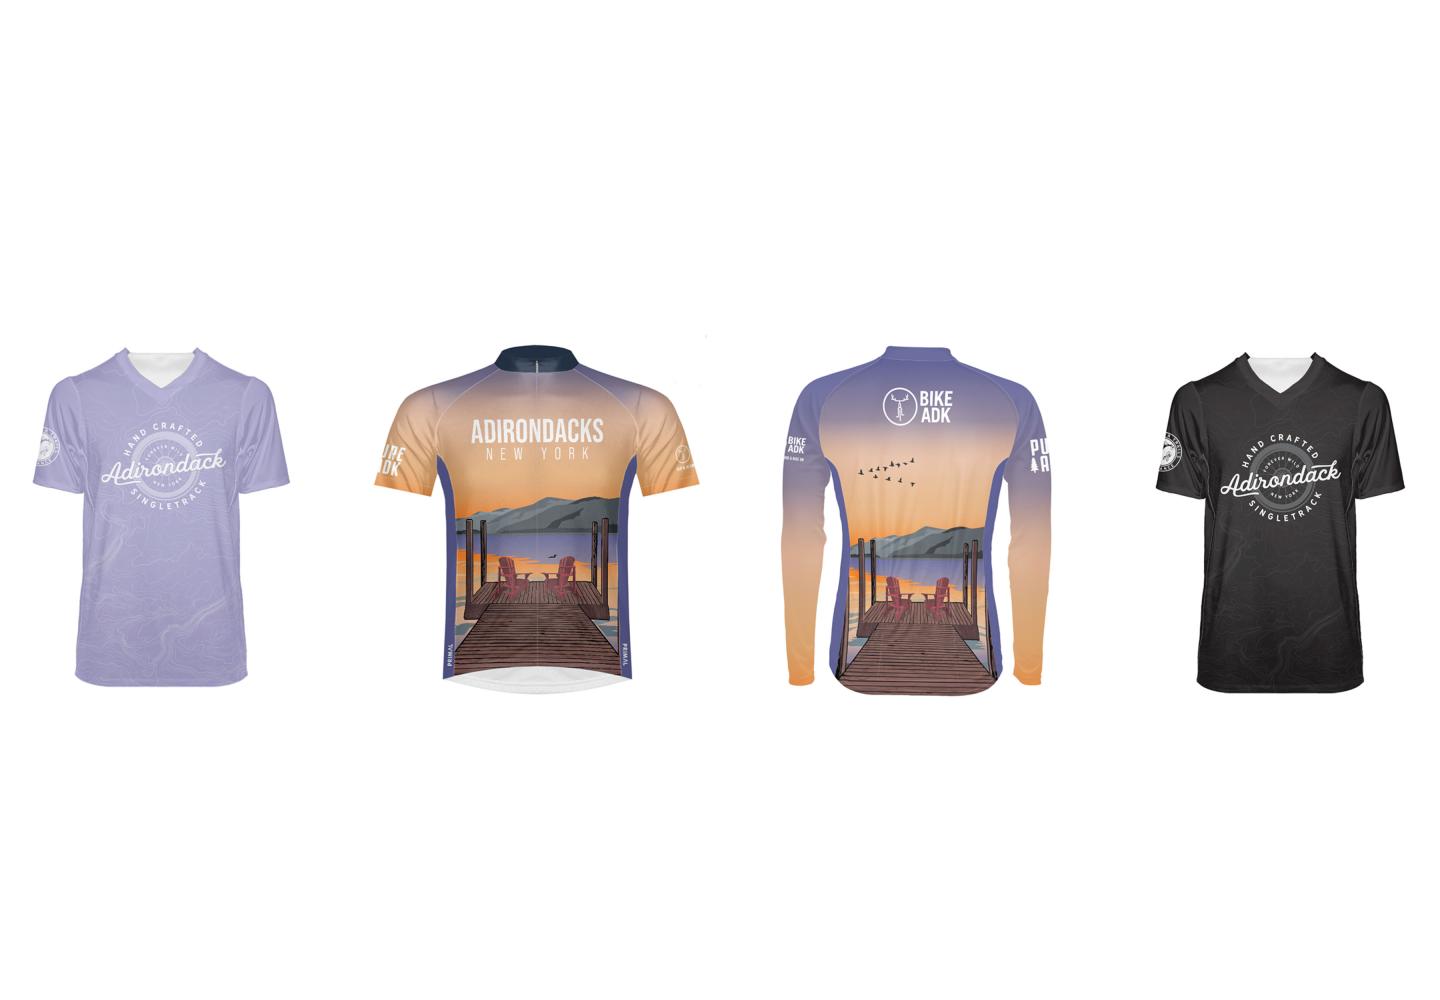 Bike Adirondacks jerseys are available in road and mountain bike versions.